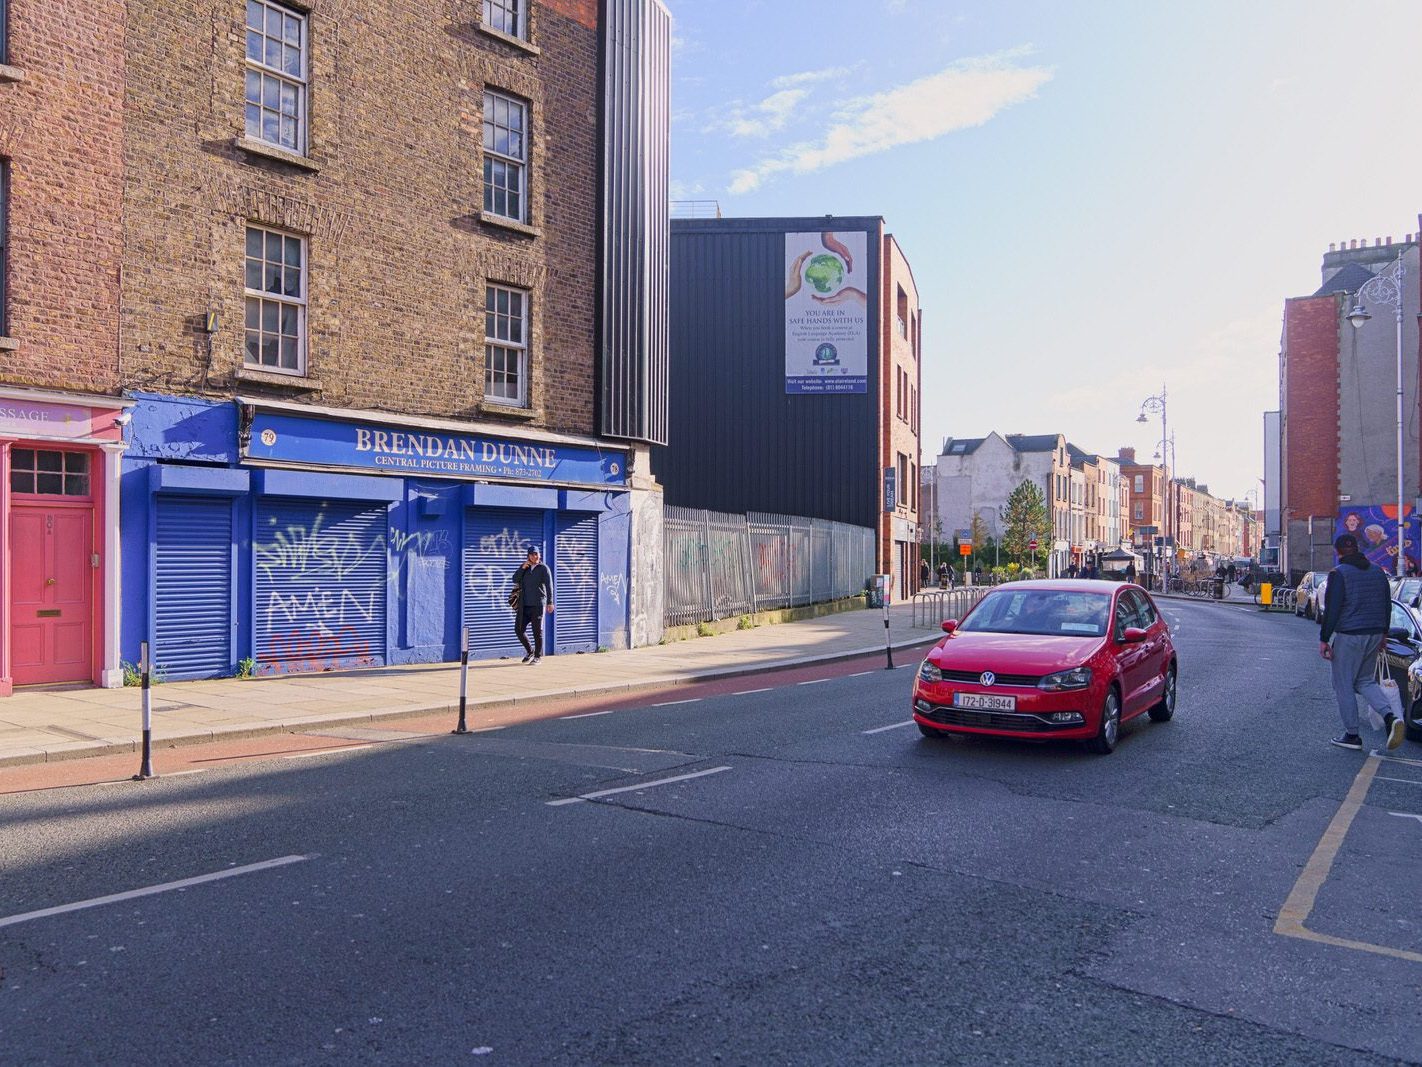 CAPEL STREET IS STILL A W.I.P. [THE PERIOD BETWEEN HALLOWEEN AND CHRISTMAS]-224772-1